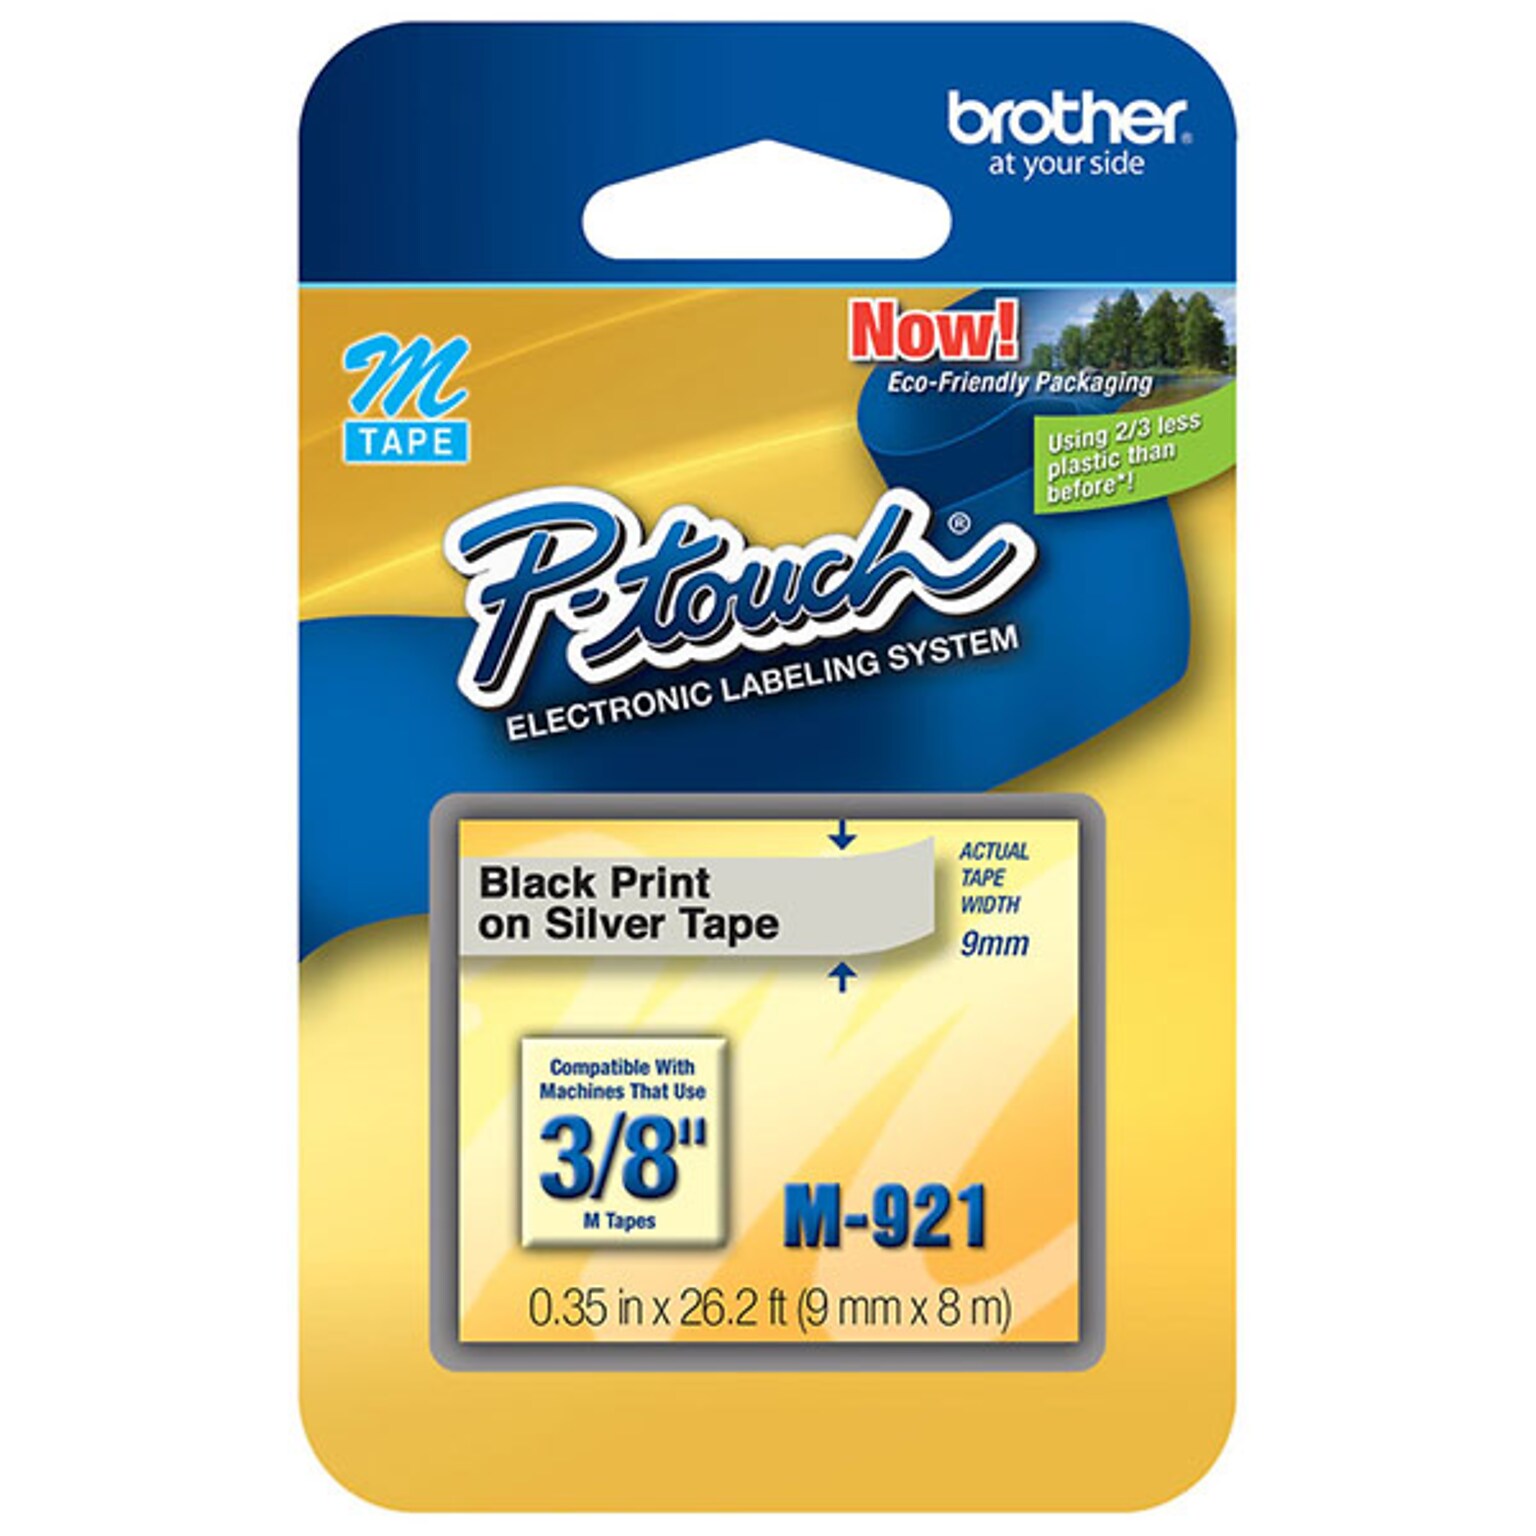 Brother M921 9mm (3/8) Black on Silver Non-Laminated Tape (8m/26.2)